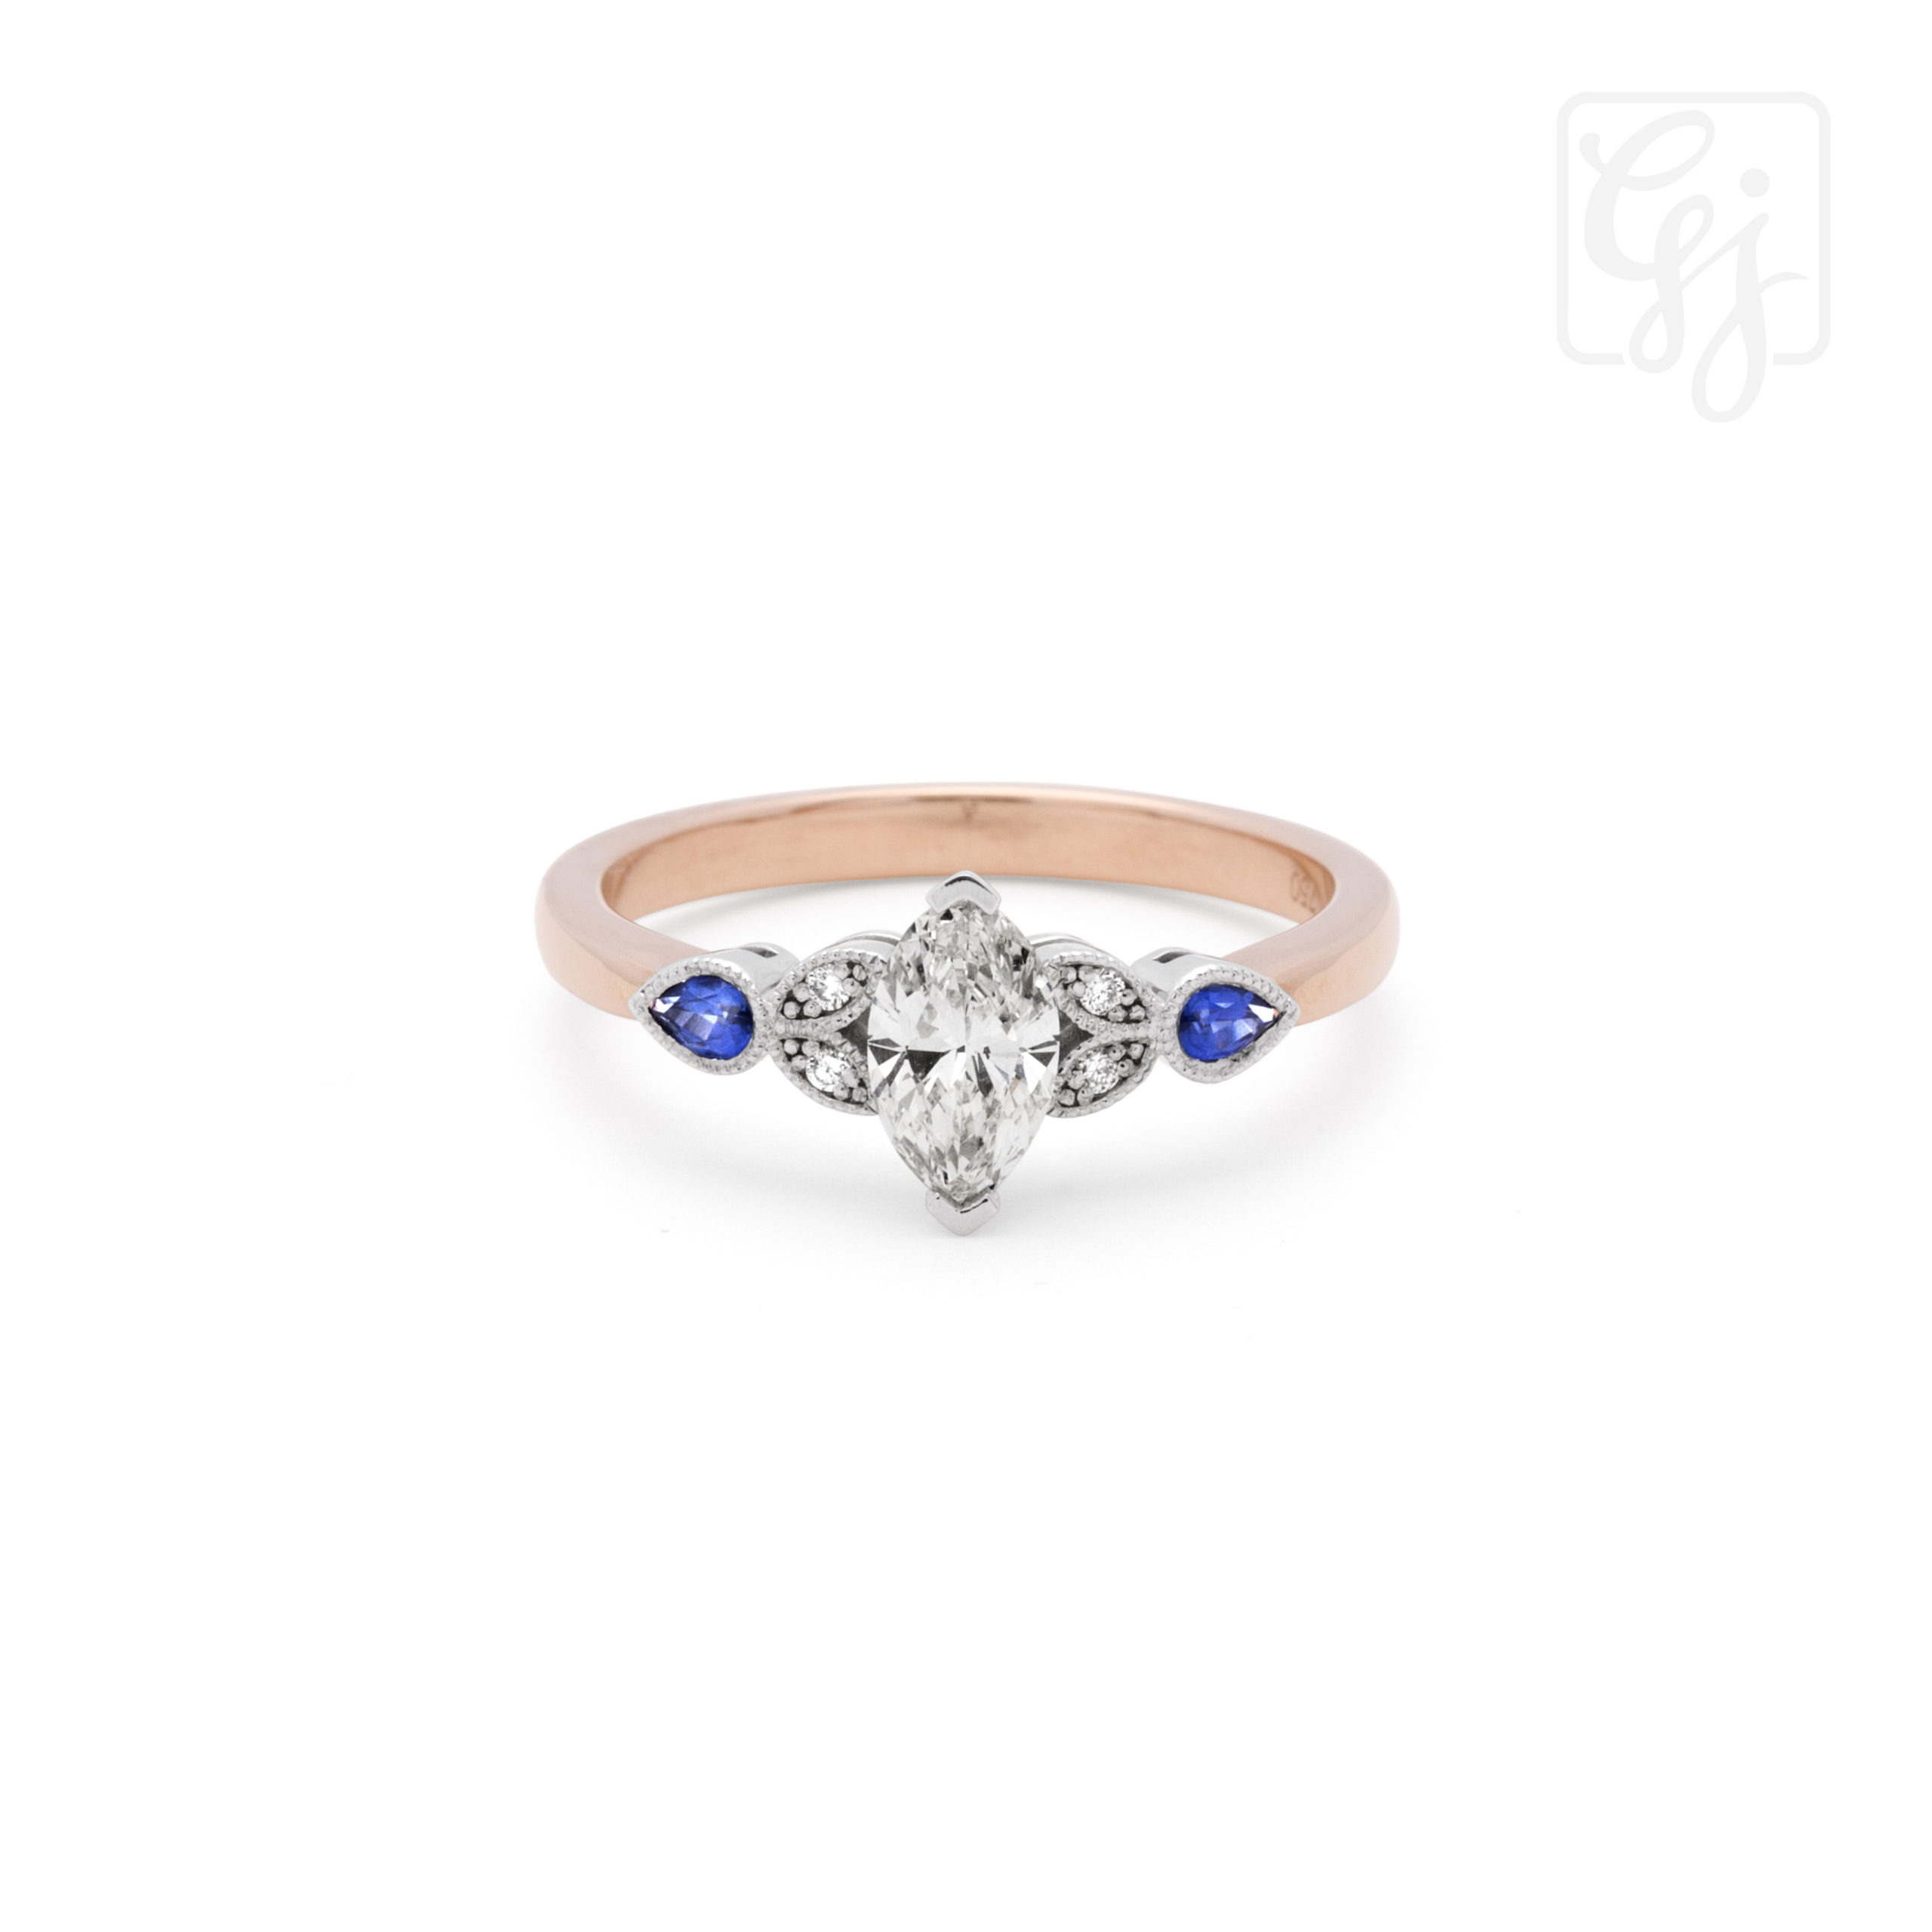 18K Rose Gold Diamond And Sapphire Ring